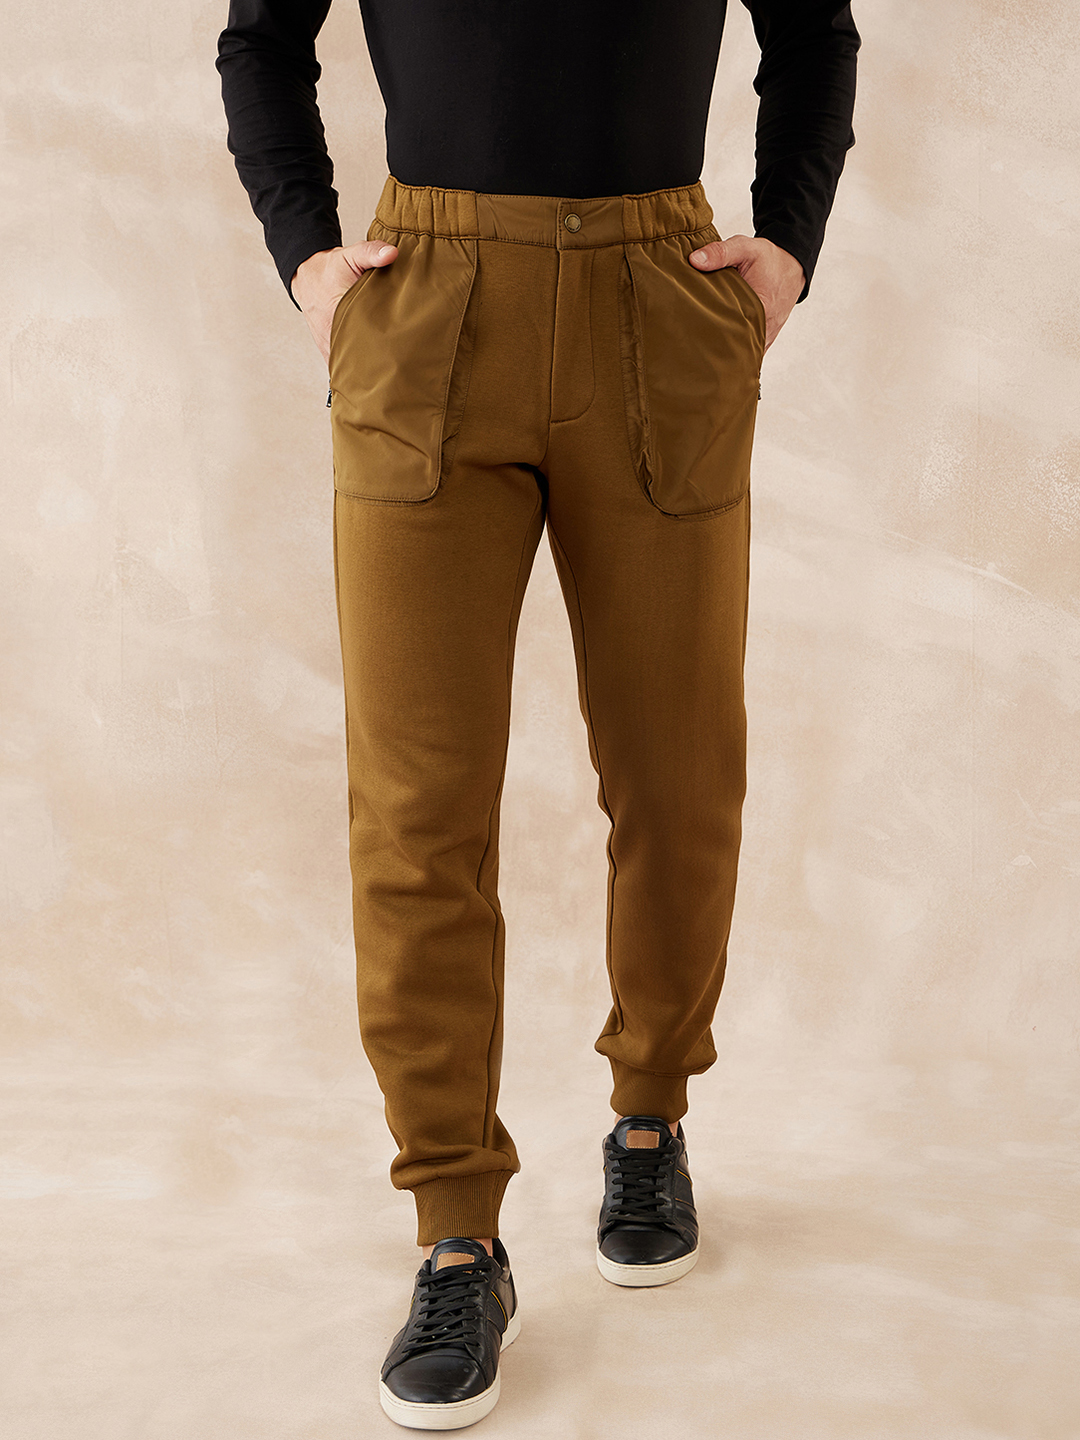 fcity.in - Youngrunner Men Solid Multi Pocket Track Pant / Fashionable